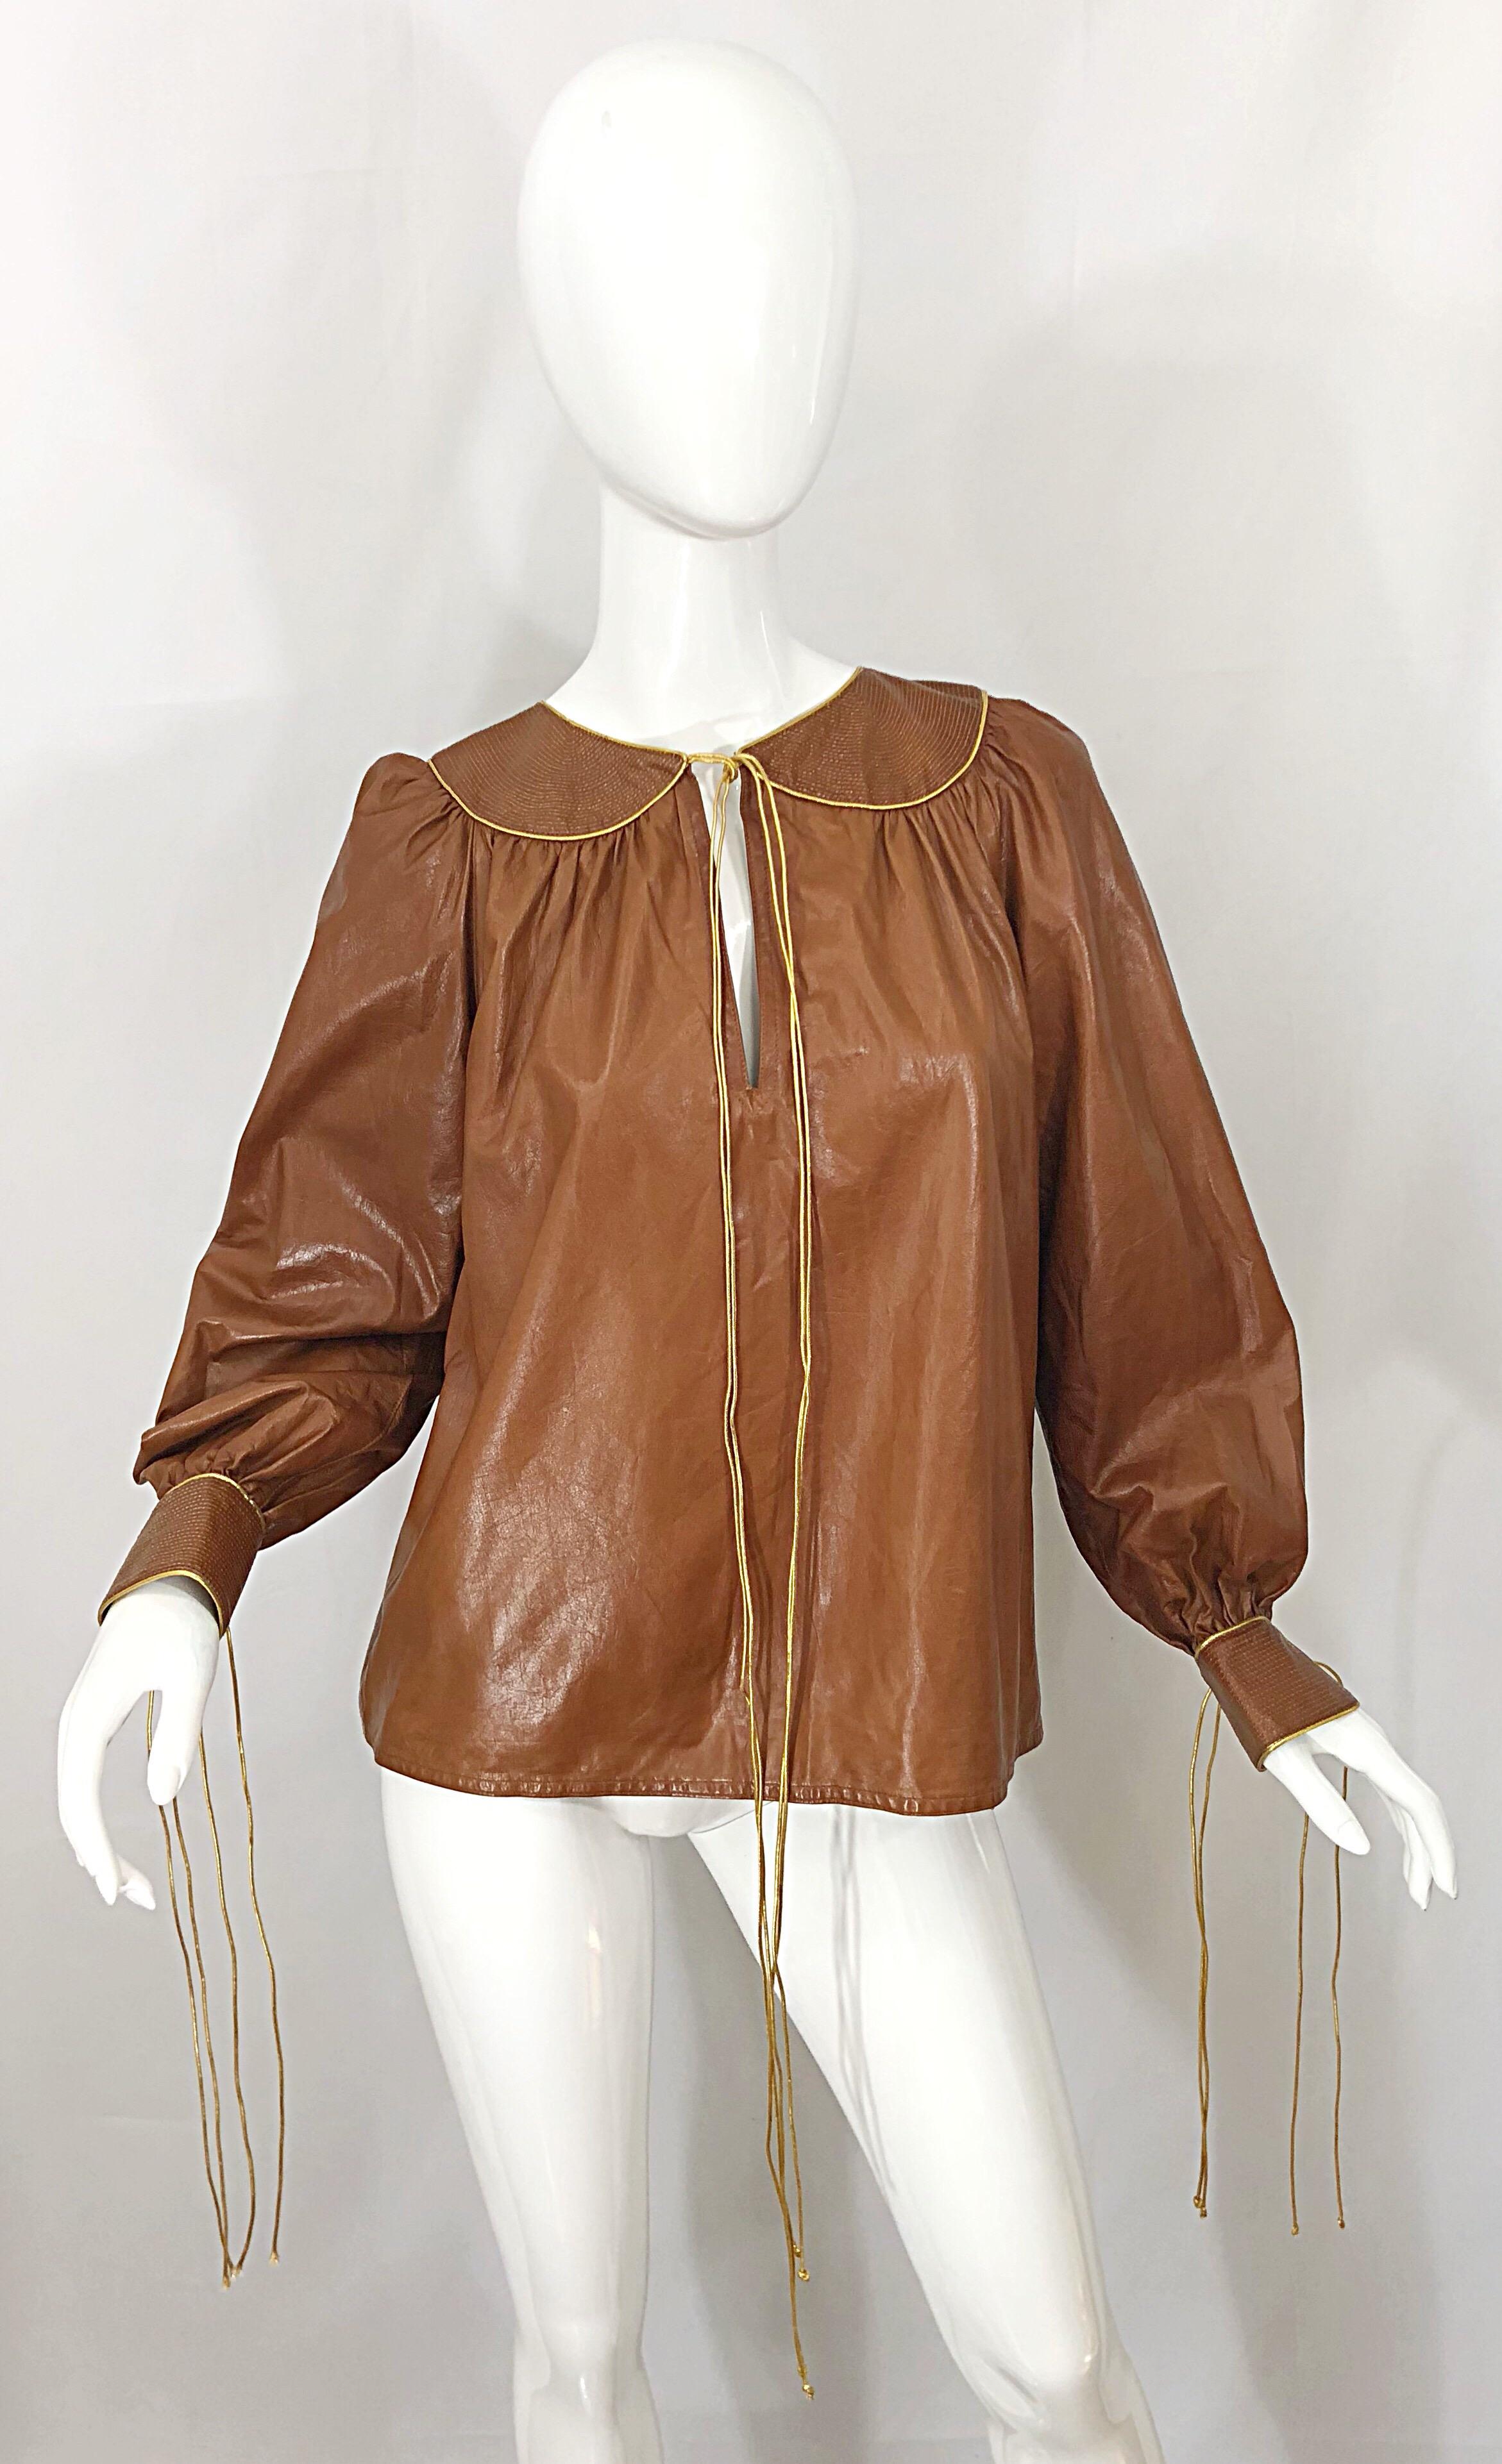 Rare, and nothing short of amazing 1970s GEOFFREY BEENE for NEIMAN MARCUS camel, tan / light brown butter soft leather shirt! Features a rich camel leather that will match anything and everything. Gold metallic cord ties at center neck and each